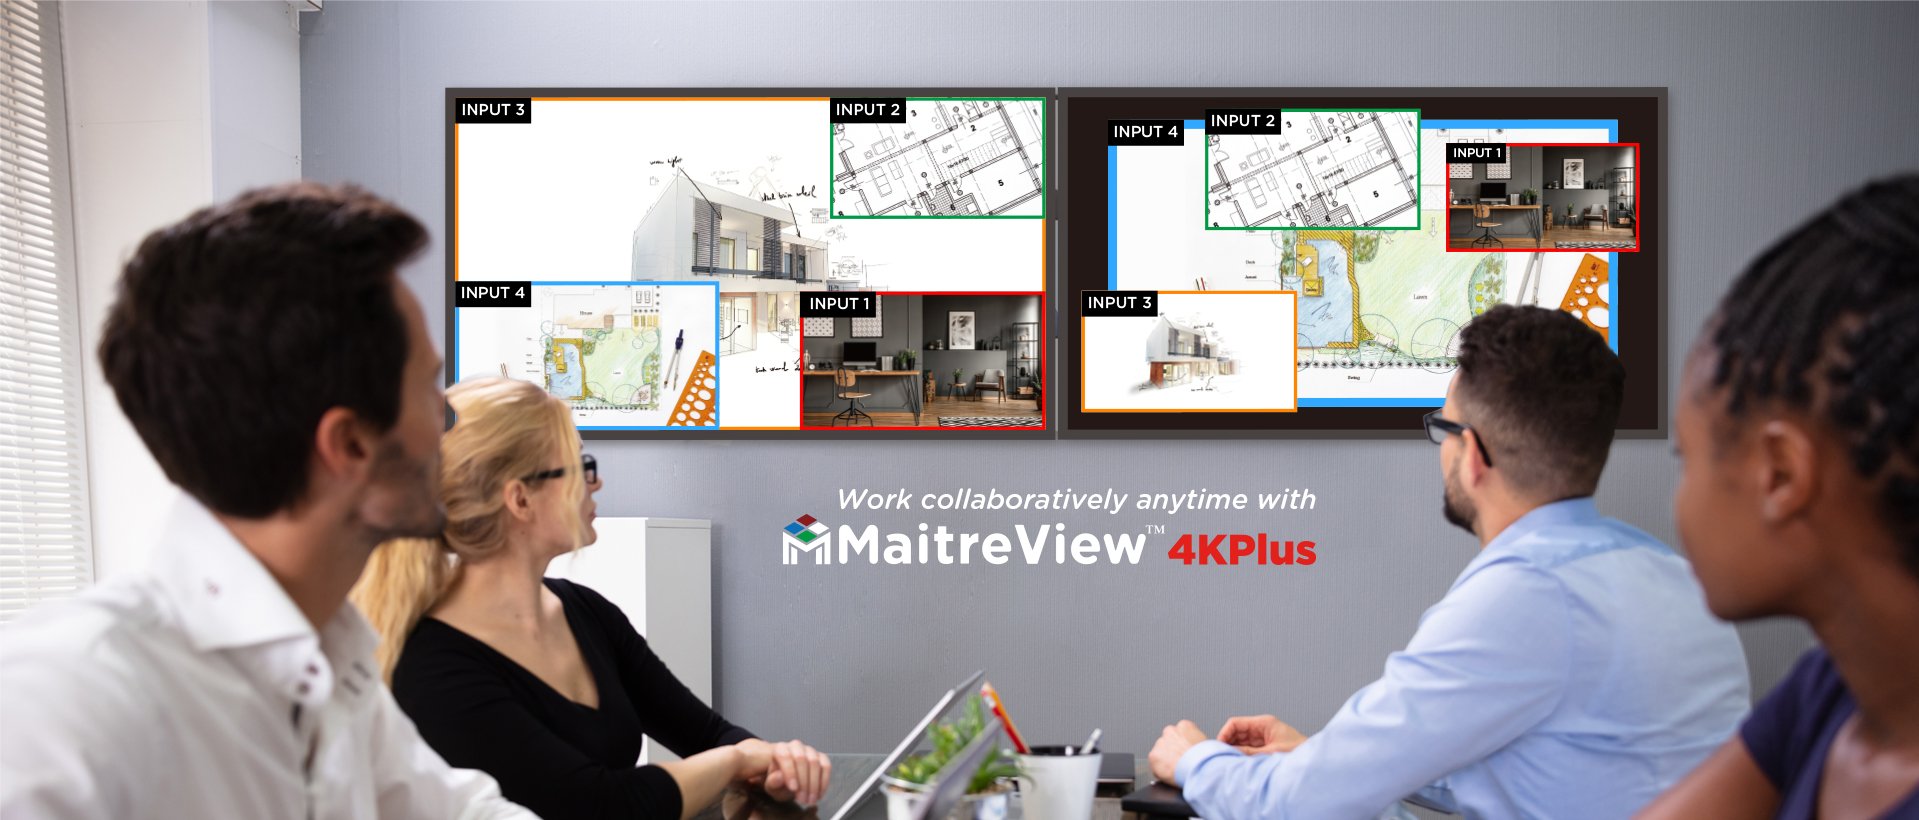 The MaitreView™ 4KPlus Upgrades A Technology Company's Meeting Room